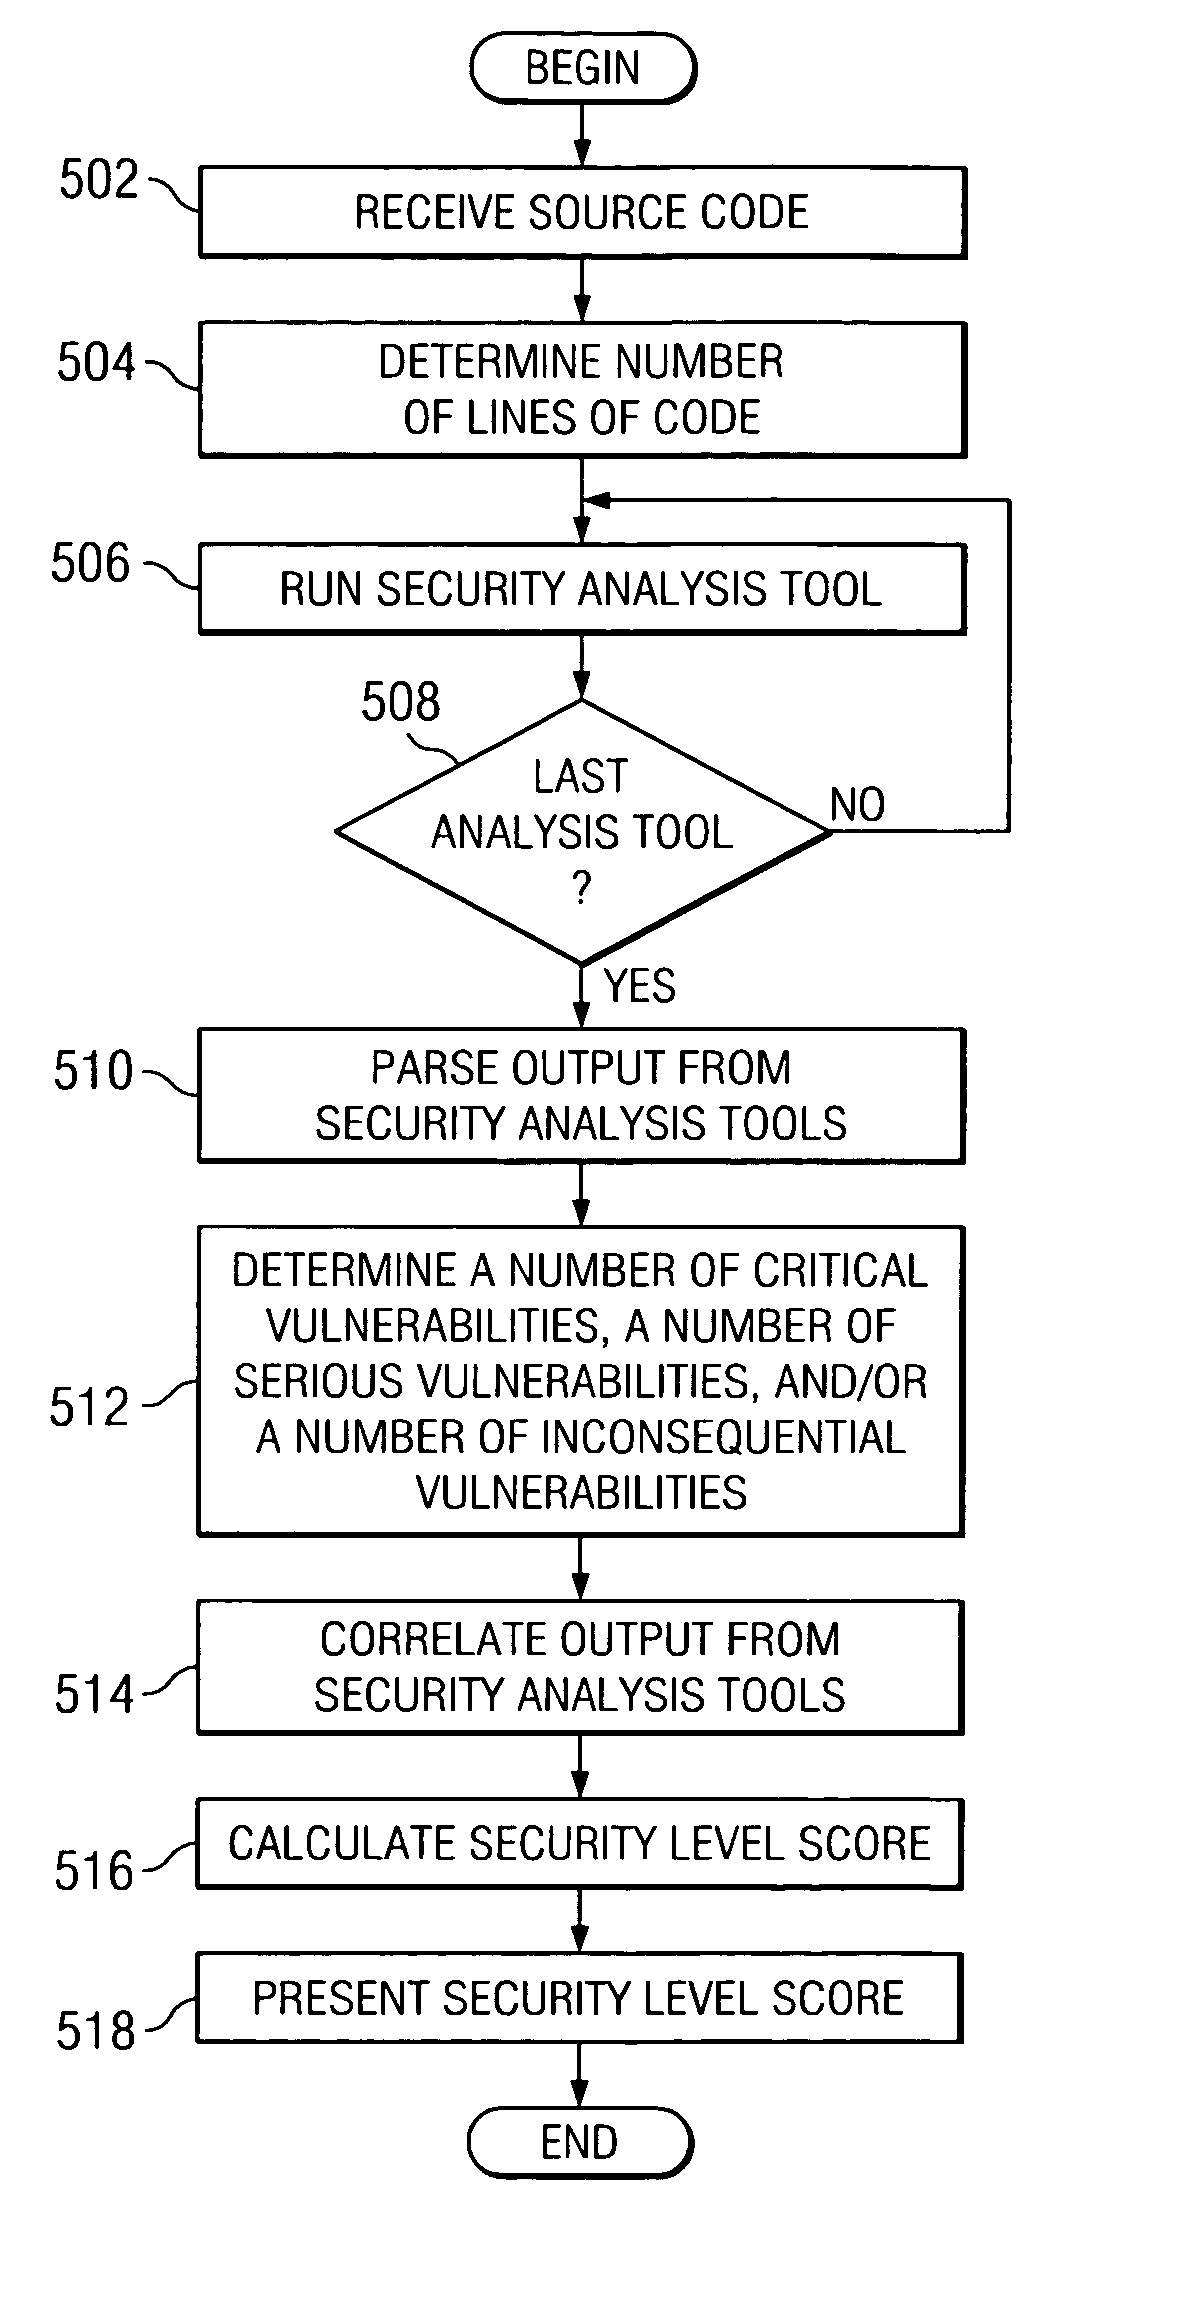 Probabilistic mechanism to determine level of security for a software package